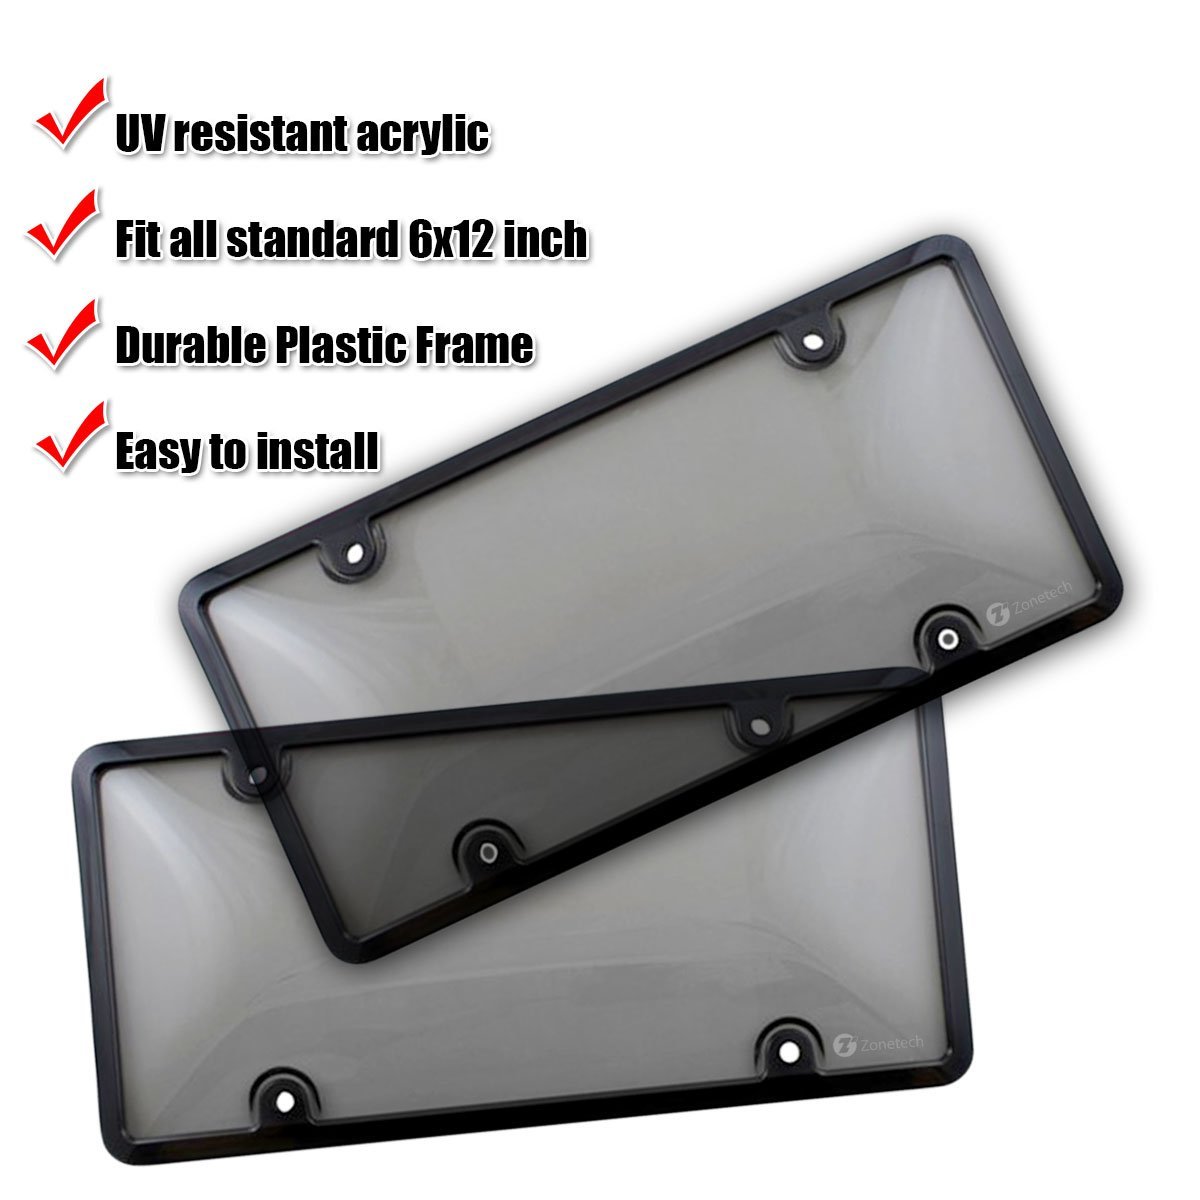 Rust-Proof Rattle-Proof Silicone Black License Plate Frame with Cover-Flat Smoked License Plate Cover Holder Caps Unbreakable License Plate Shields Combo with Stainless Steel License Screws 